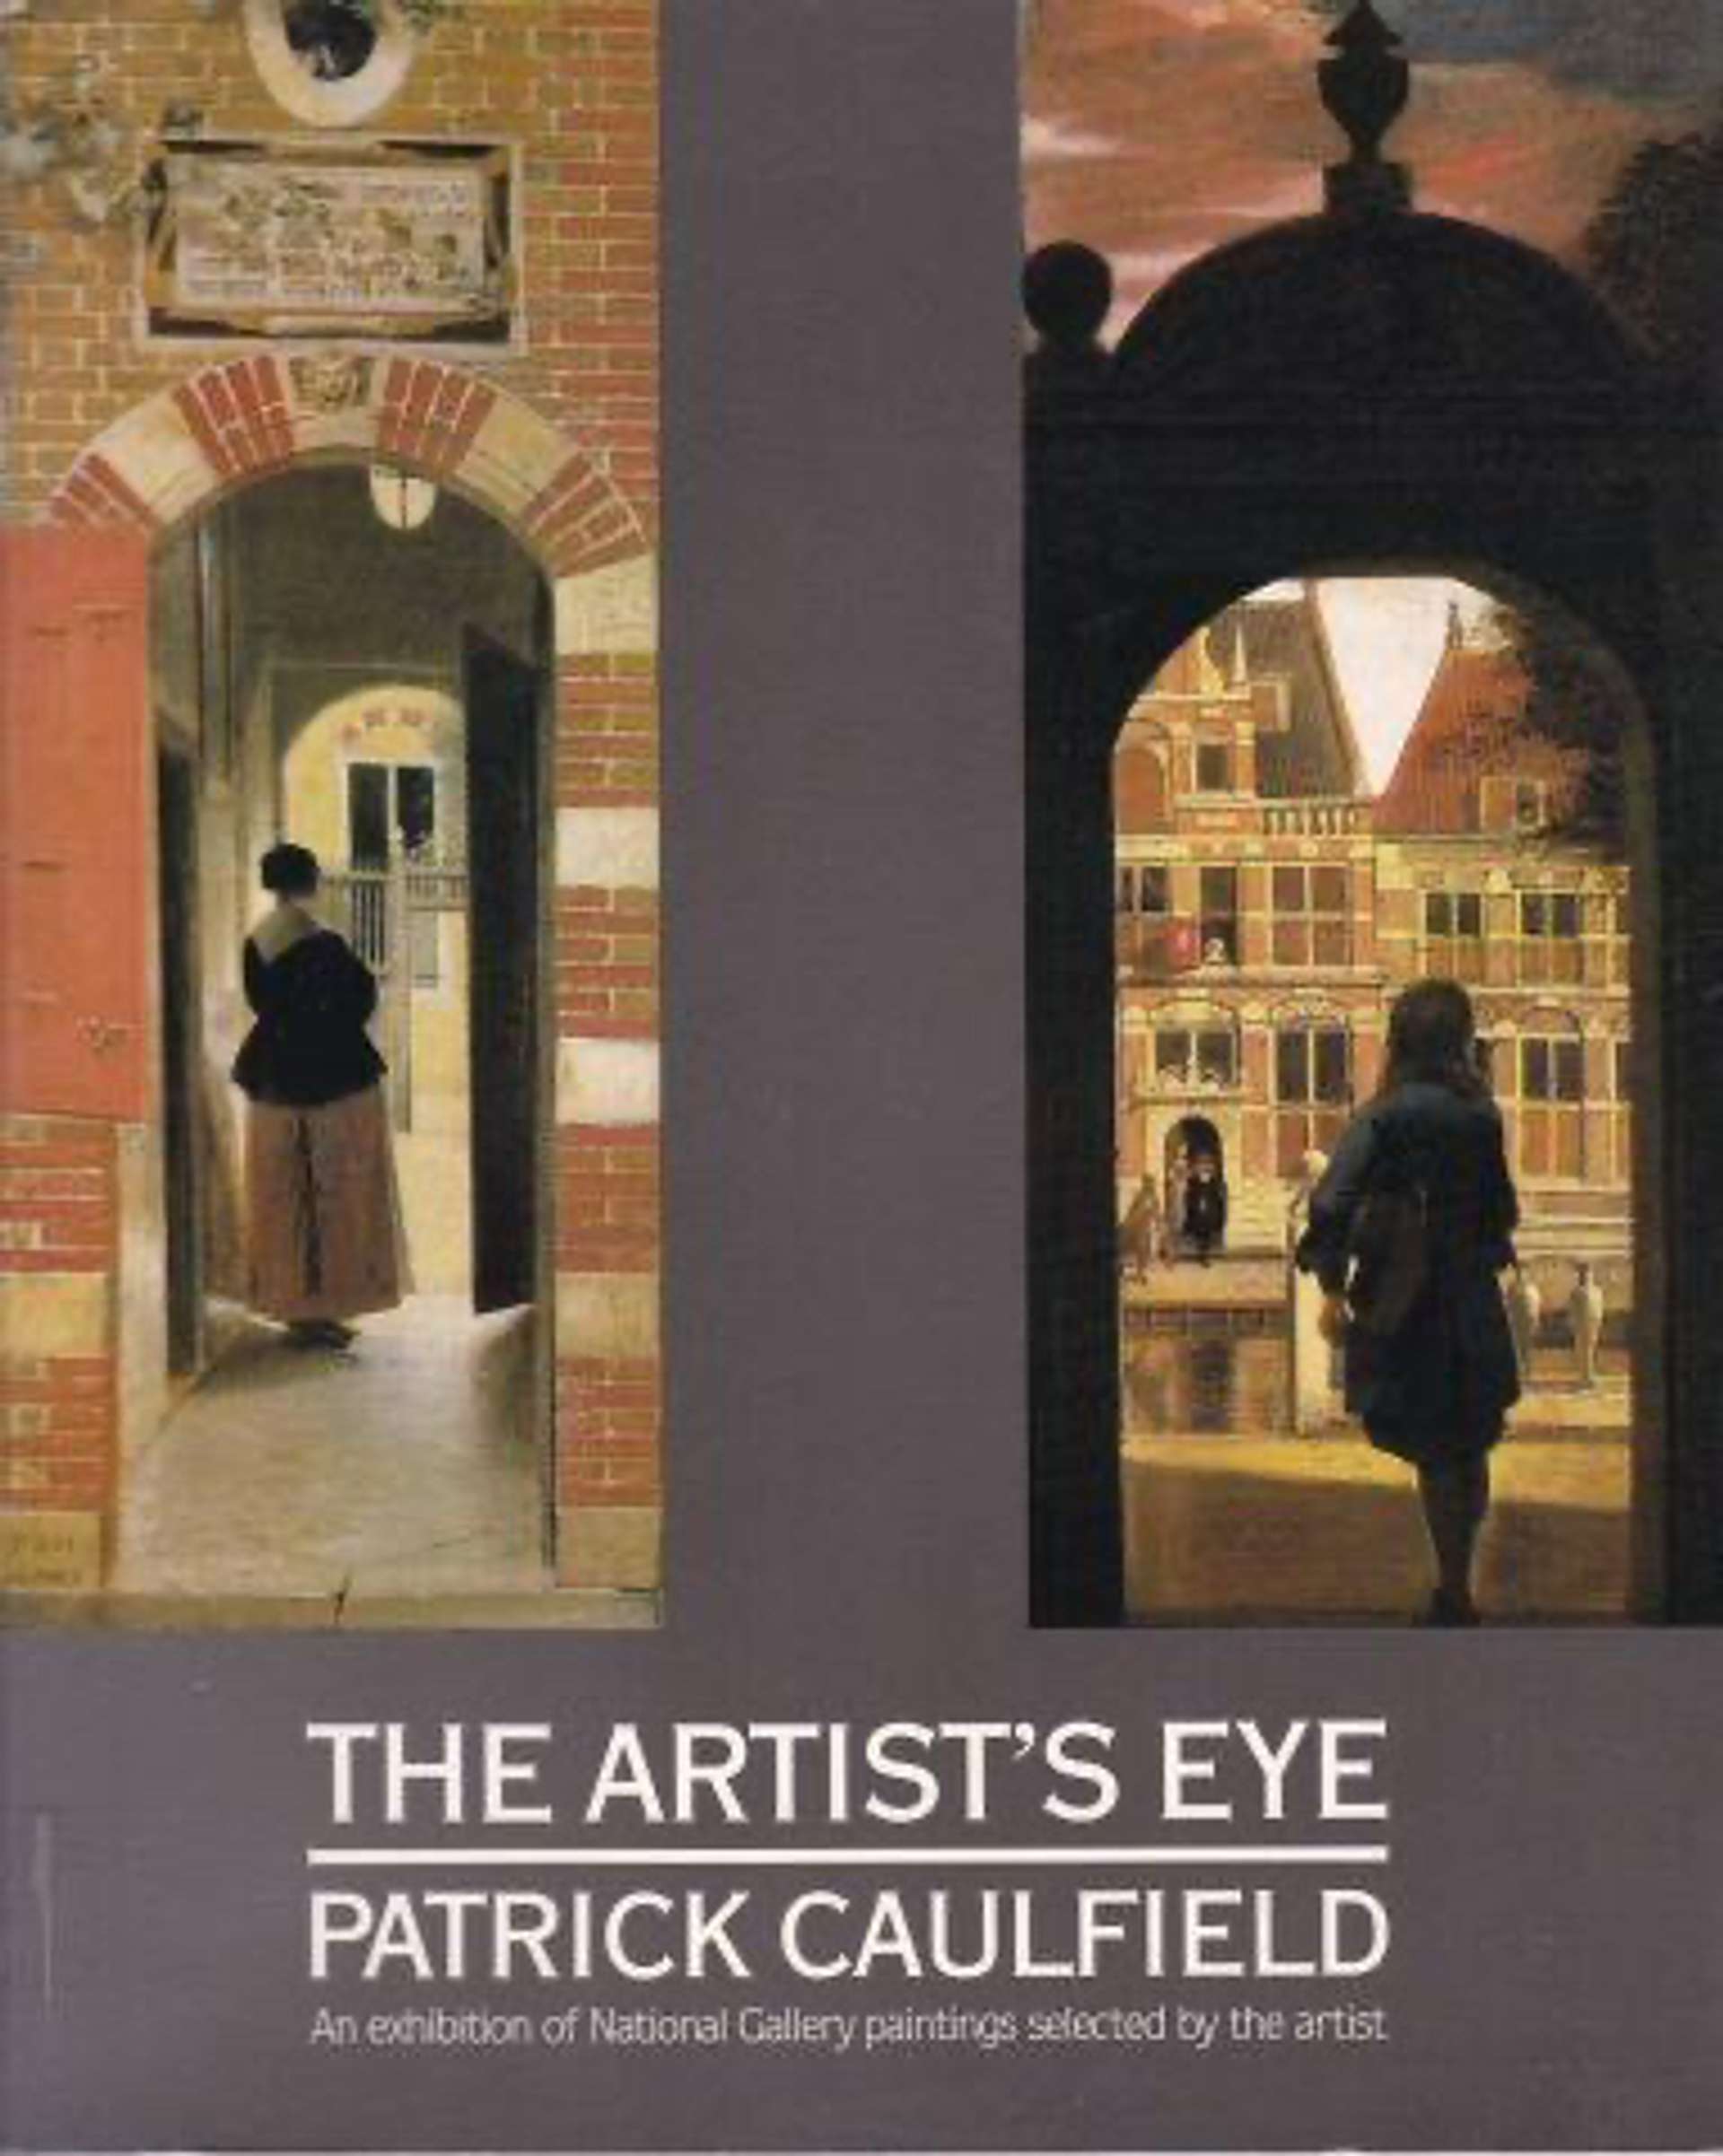 A catalogue of the exhibition poster for ‘The Artist’s Eye’ curated by the artist Patrick Caulfield and held at the National Gallery, London.